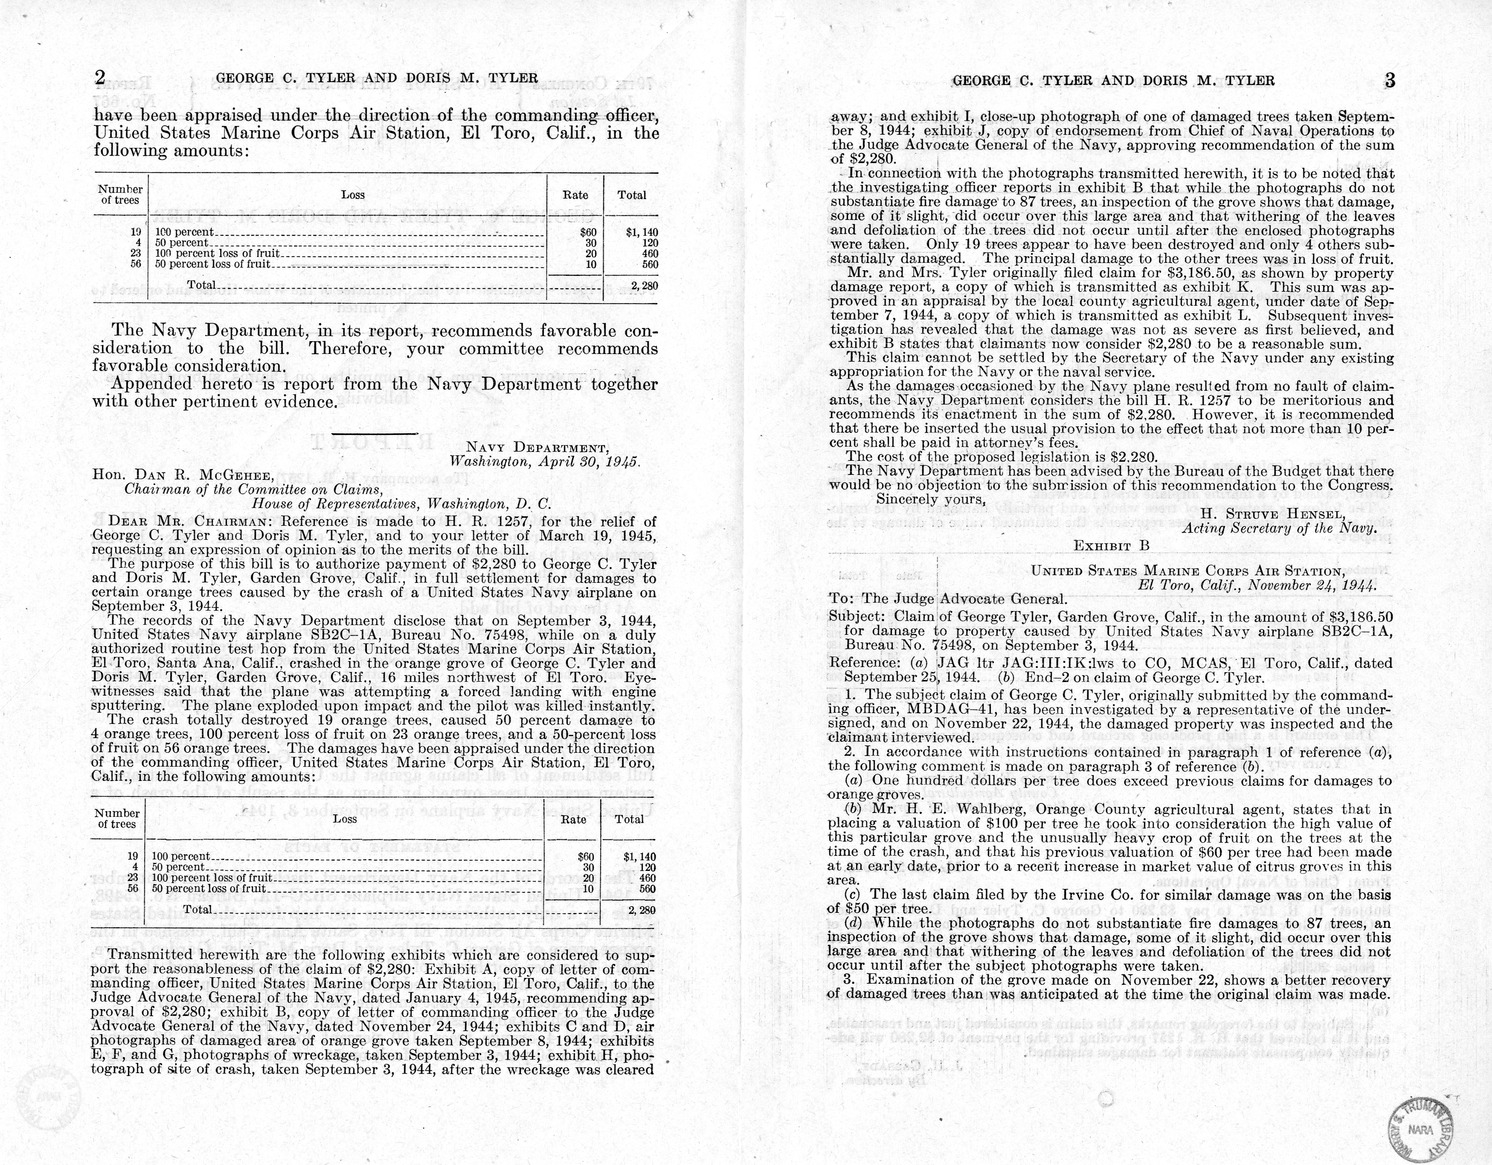 Memorandum from Frederick J. Bailey to M. C. Latta, H.R. 1257, for the Relief of George C. Tyler and Doris M. Tyler, with Attachments